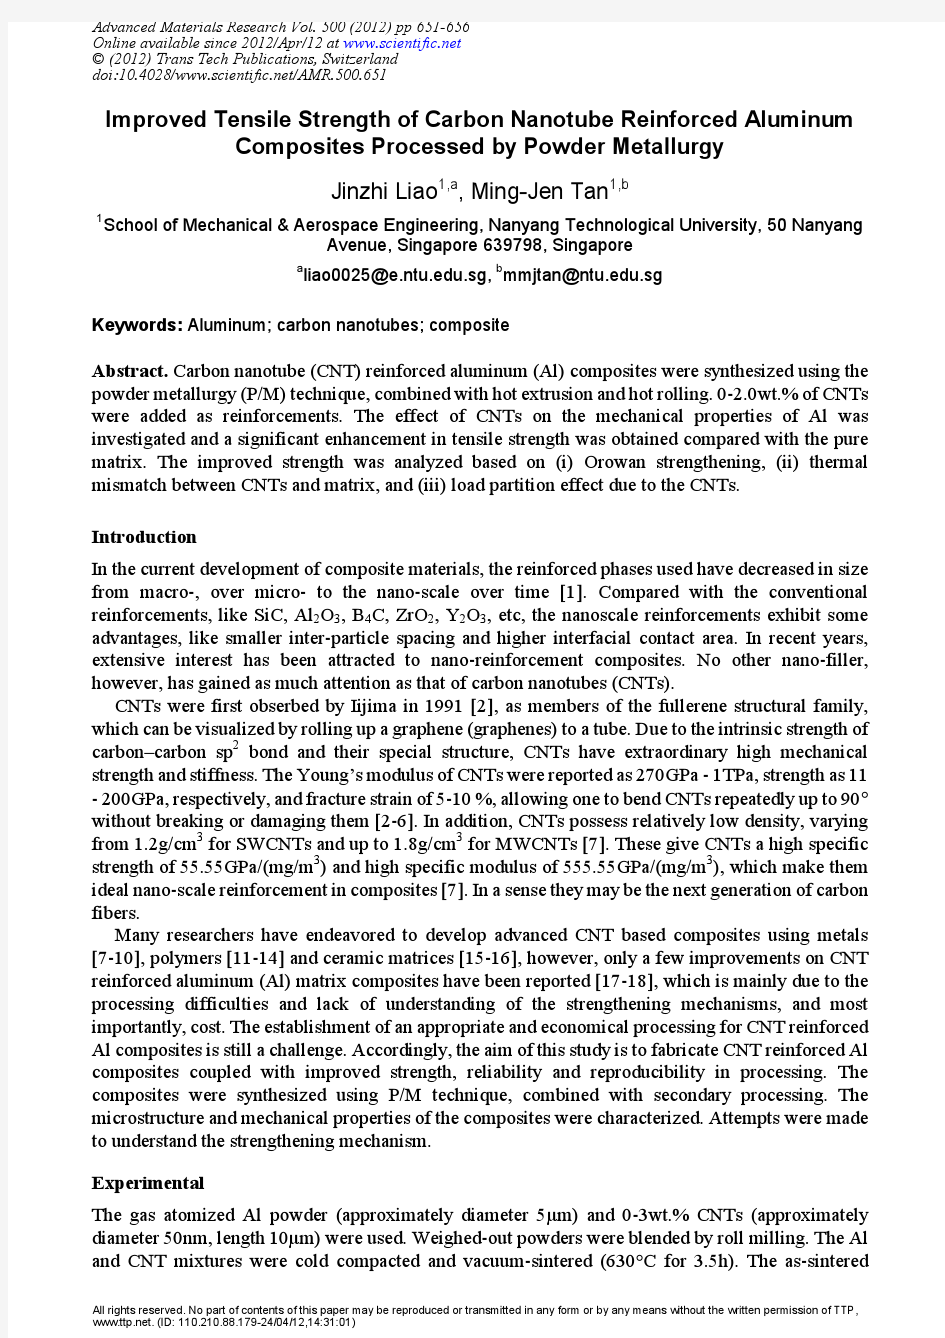 8 Improved Tensile Strength of Al-CNT Composites Processed by Powder Metallurgy